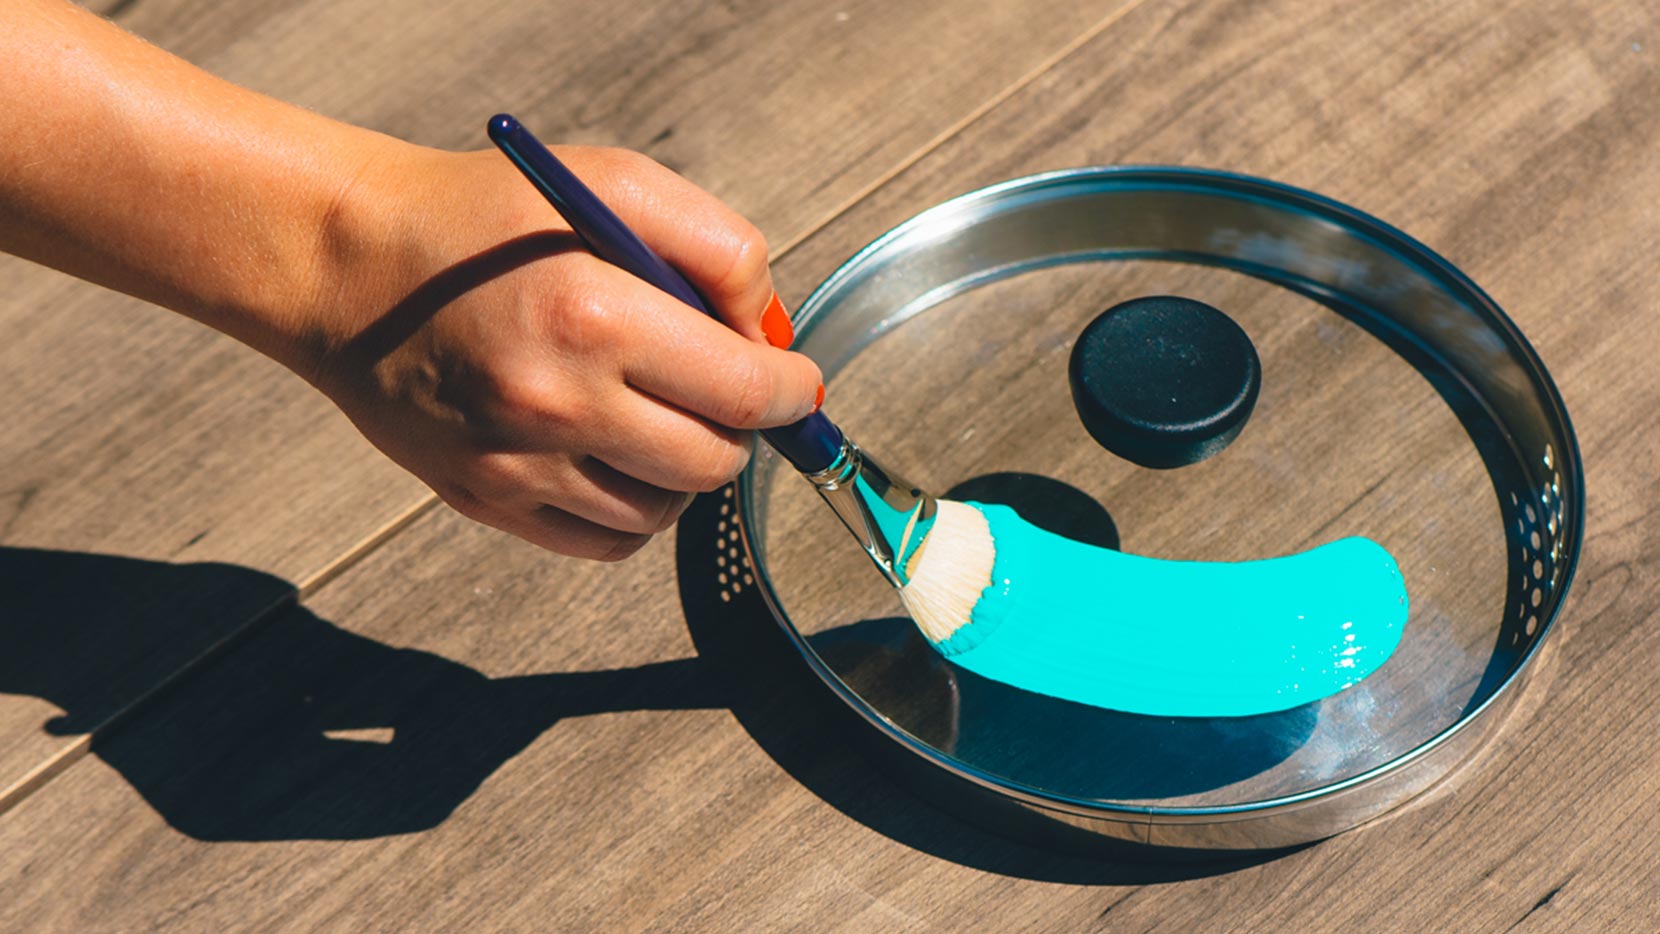 Paint pot lids (around their handles) with a variety of colors and allow to dry thoroughly